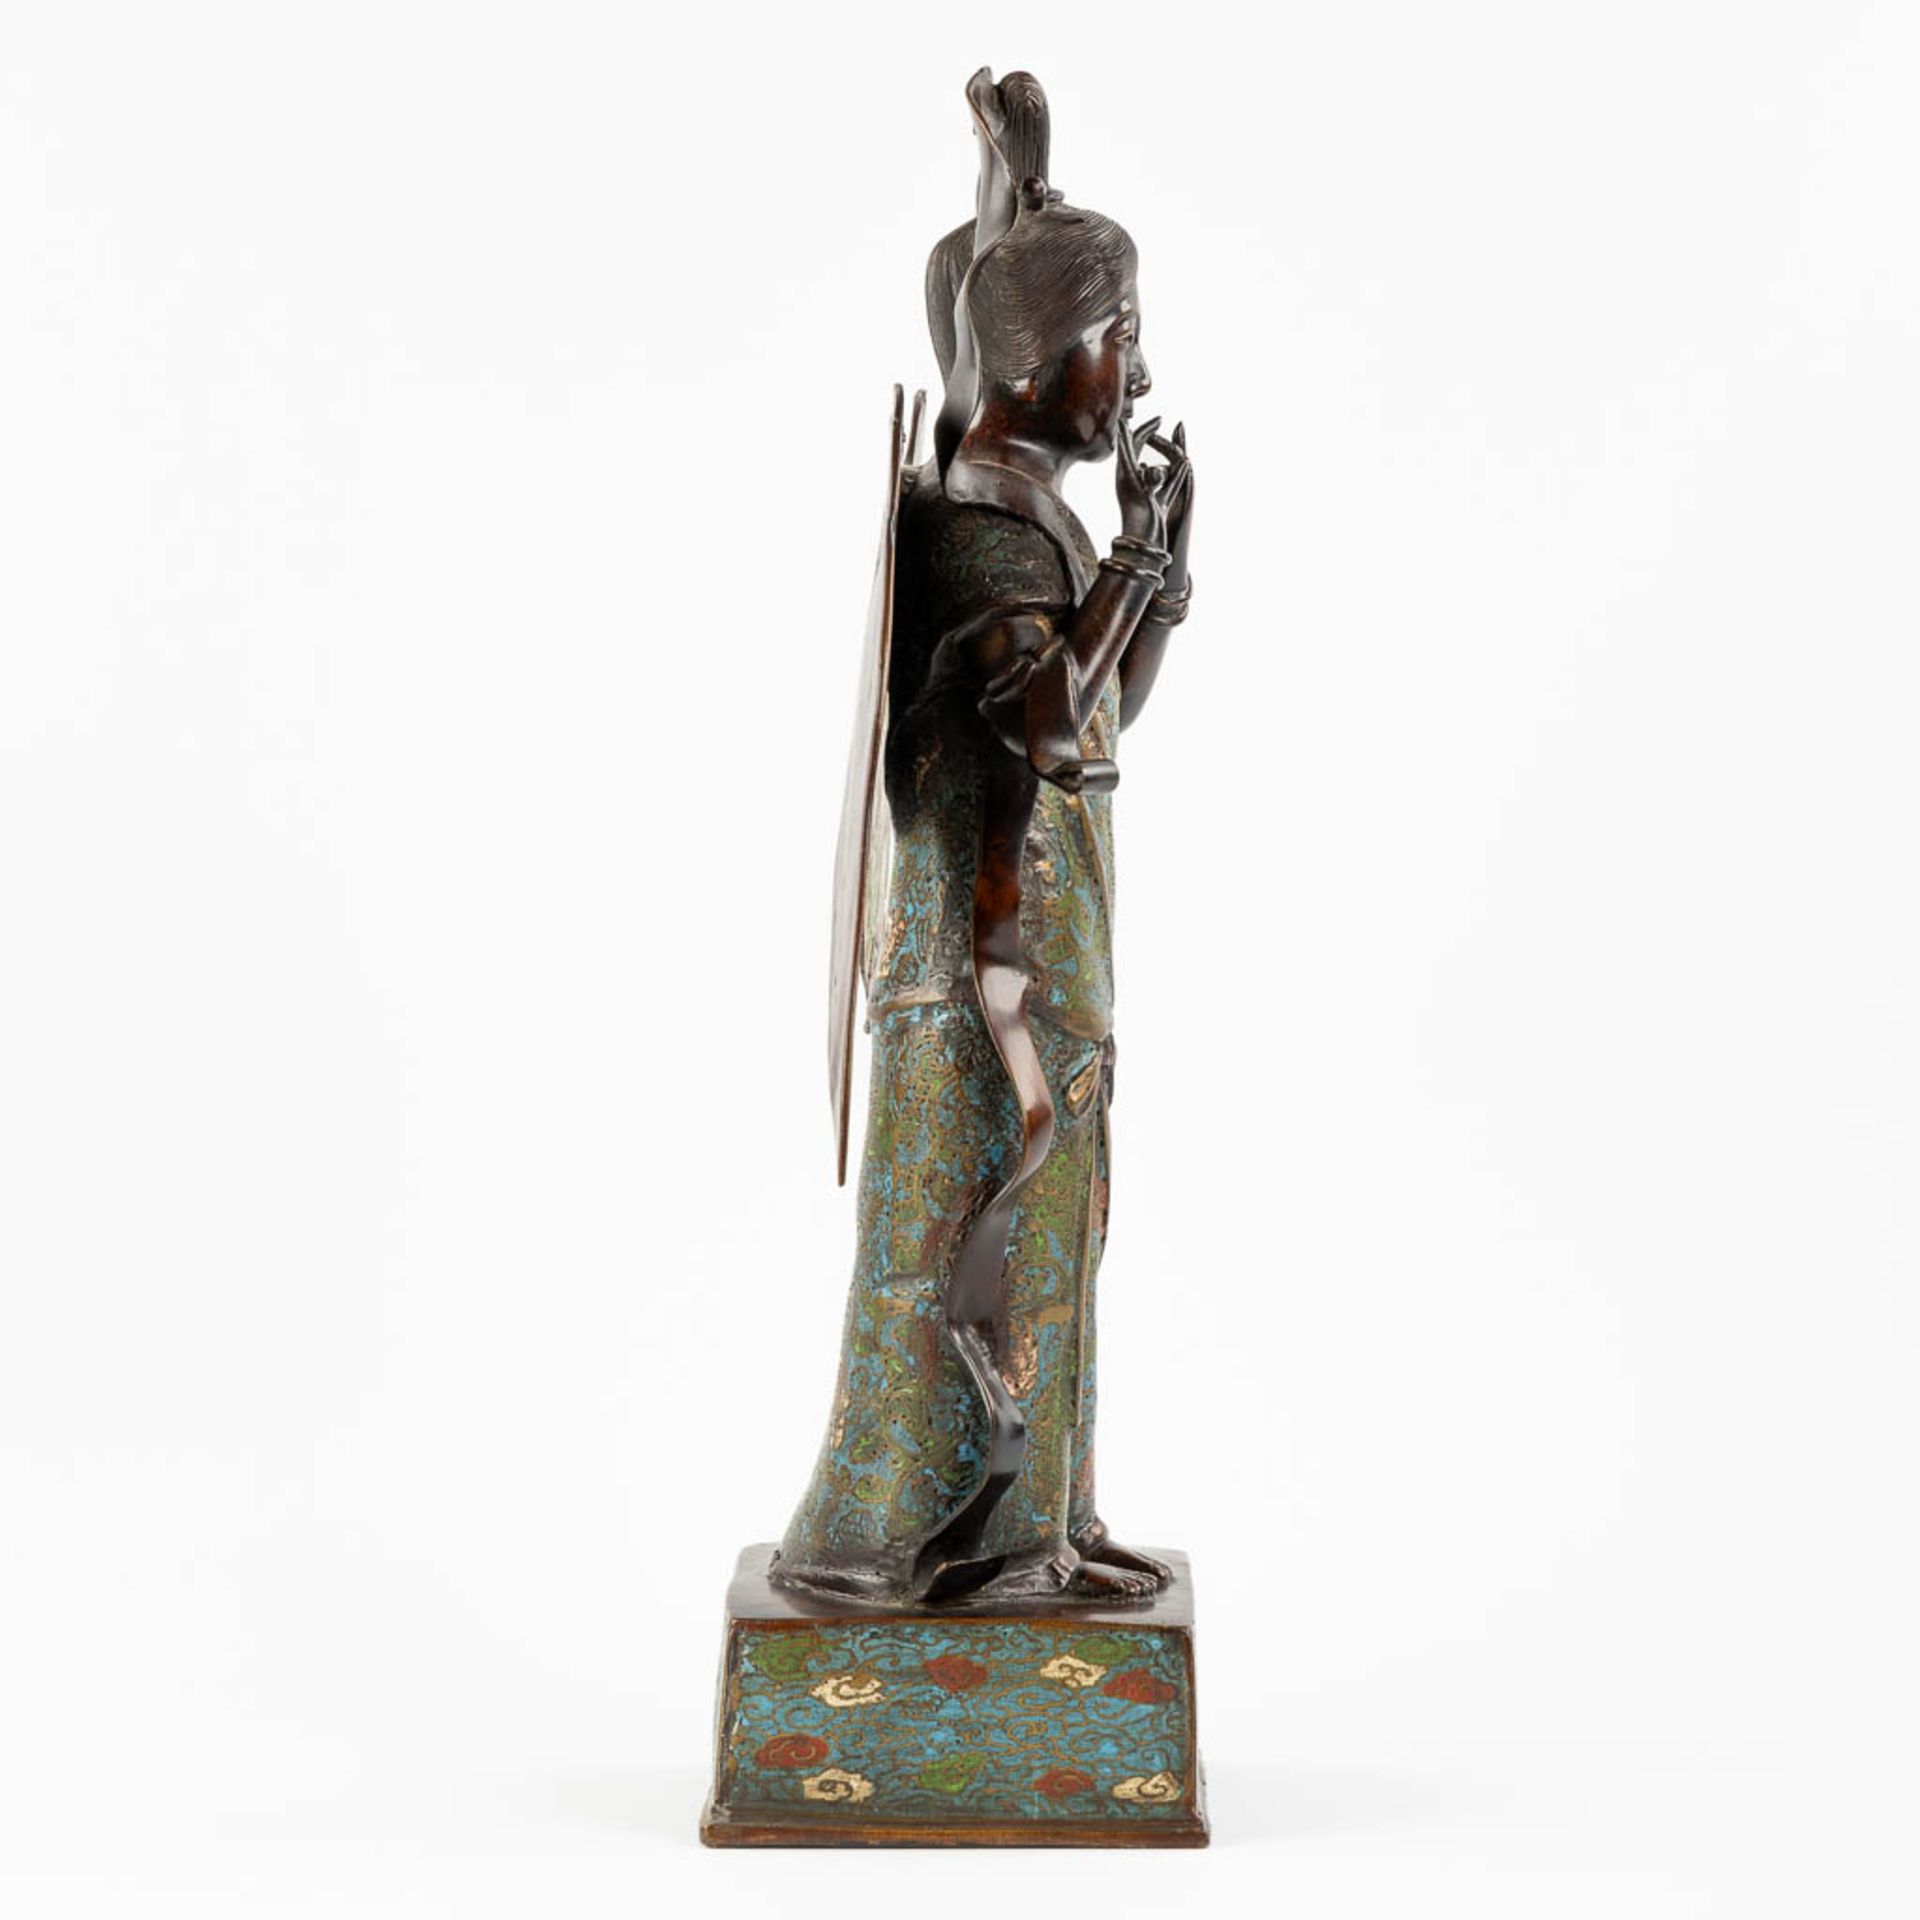 An Oriental figurine of an Angel with a flute, Champslevé bronze. (L:15 x W:35 x H:53 cm) - Image 4 of 14